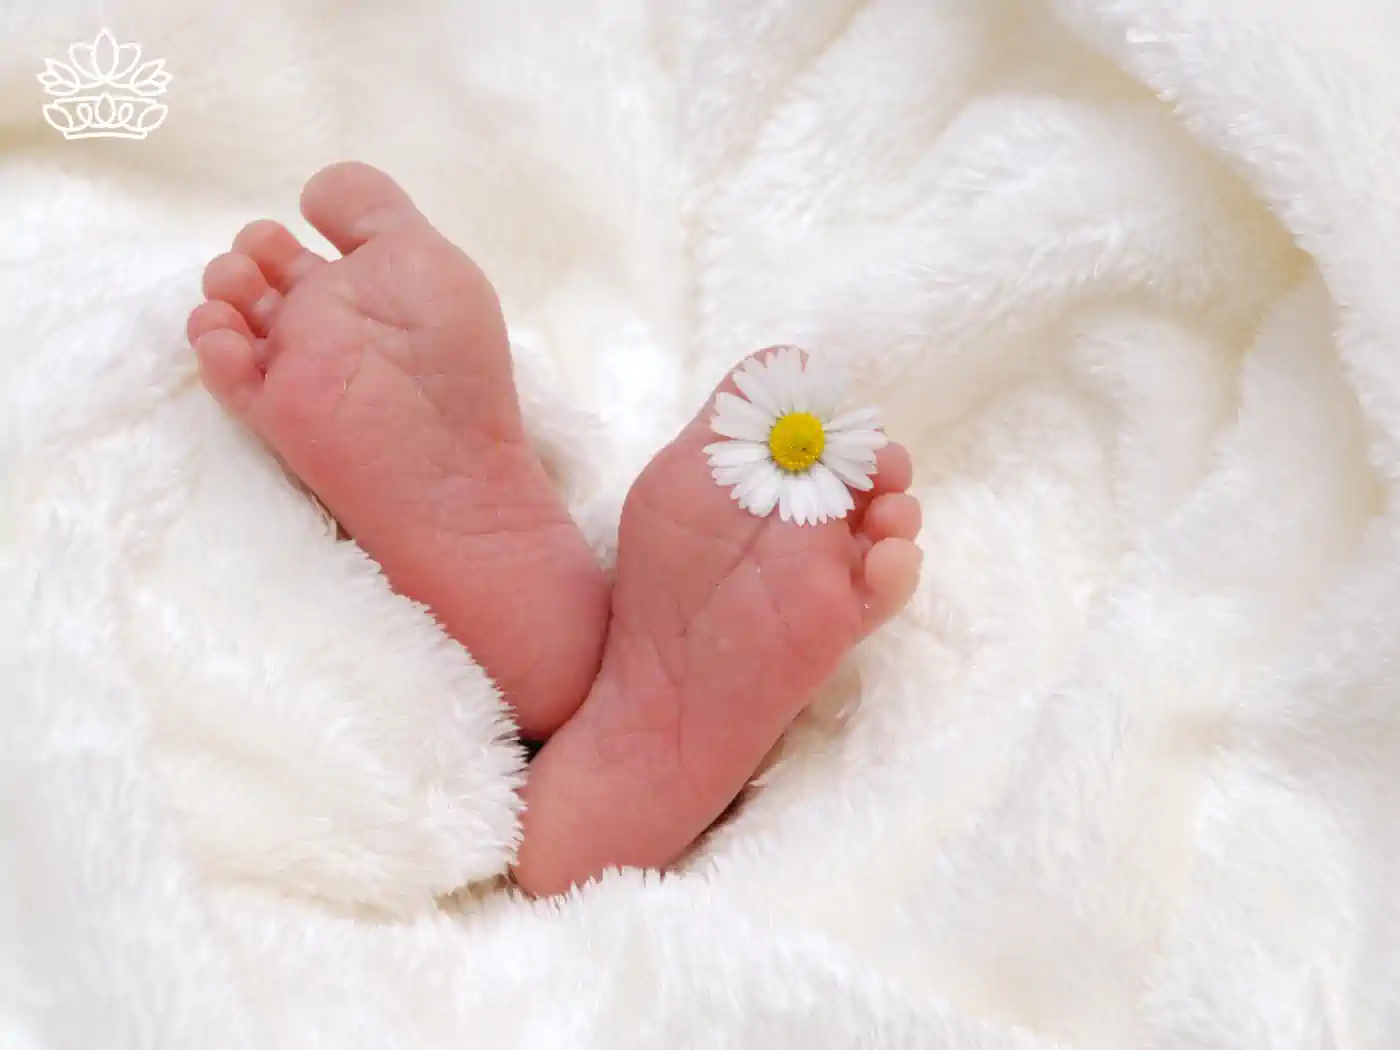 Close-up of newborn baby feet with a daisy flower between the toes, Fabulous Flowers and Gifts, Newborn Baby Gift Boxes